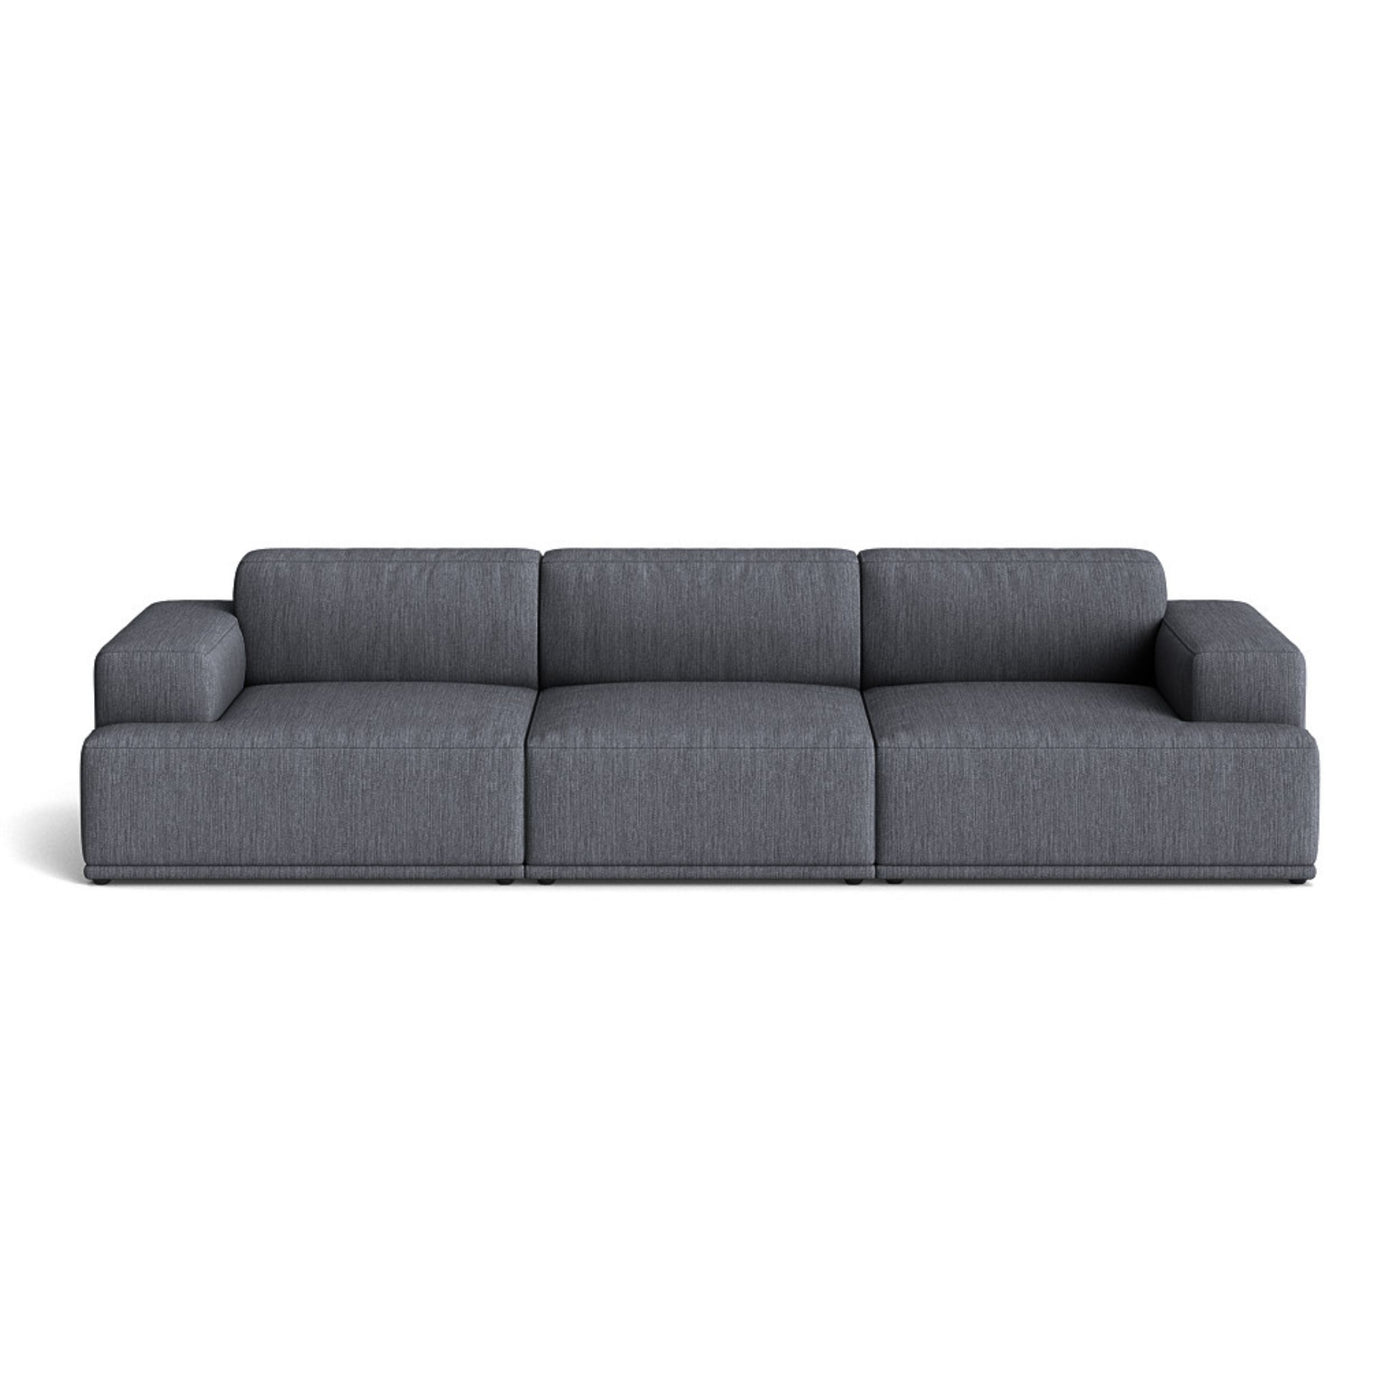 Muuto Connect Soft Modular 3 Seater Sofa, configuration 1. Made-to-order from someday designs. #colour_balder-152